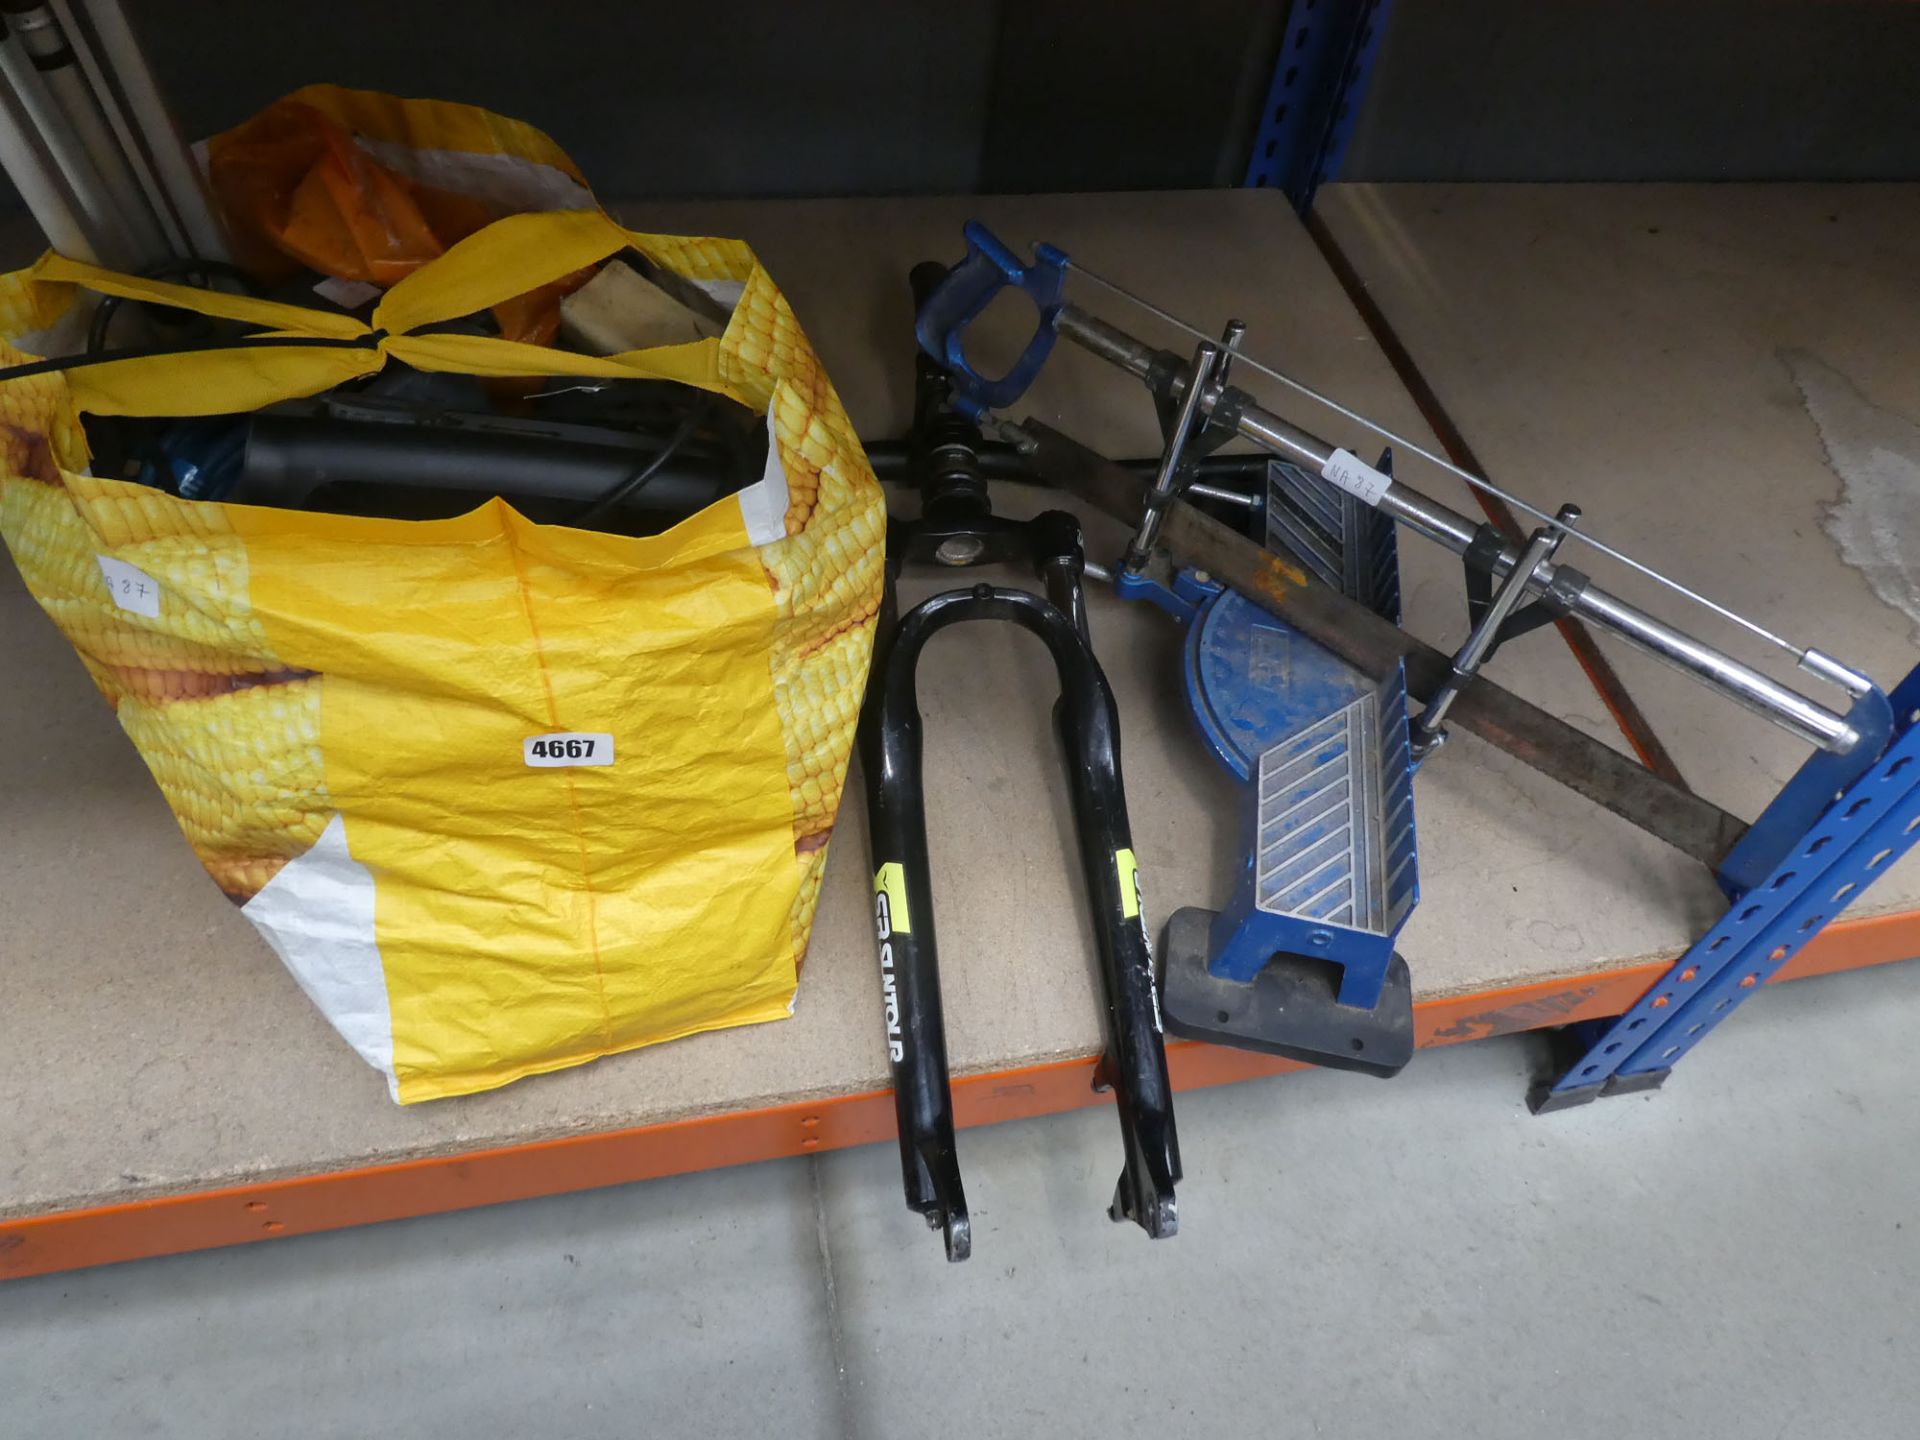 Bike forks and handlebars, projector, extension cable, mitre saw and other items